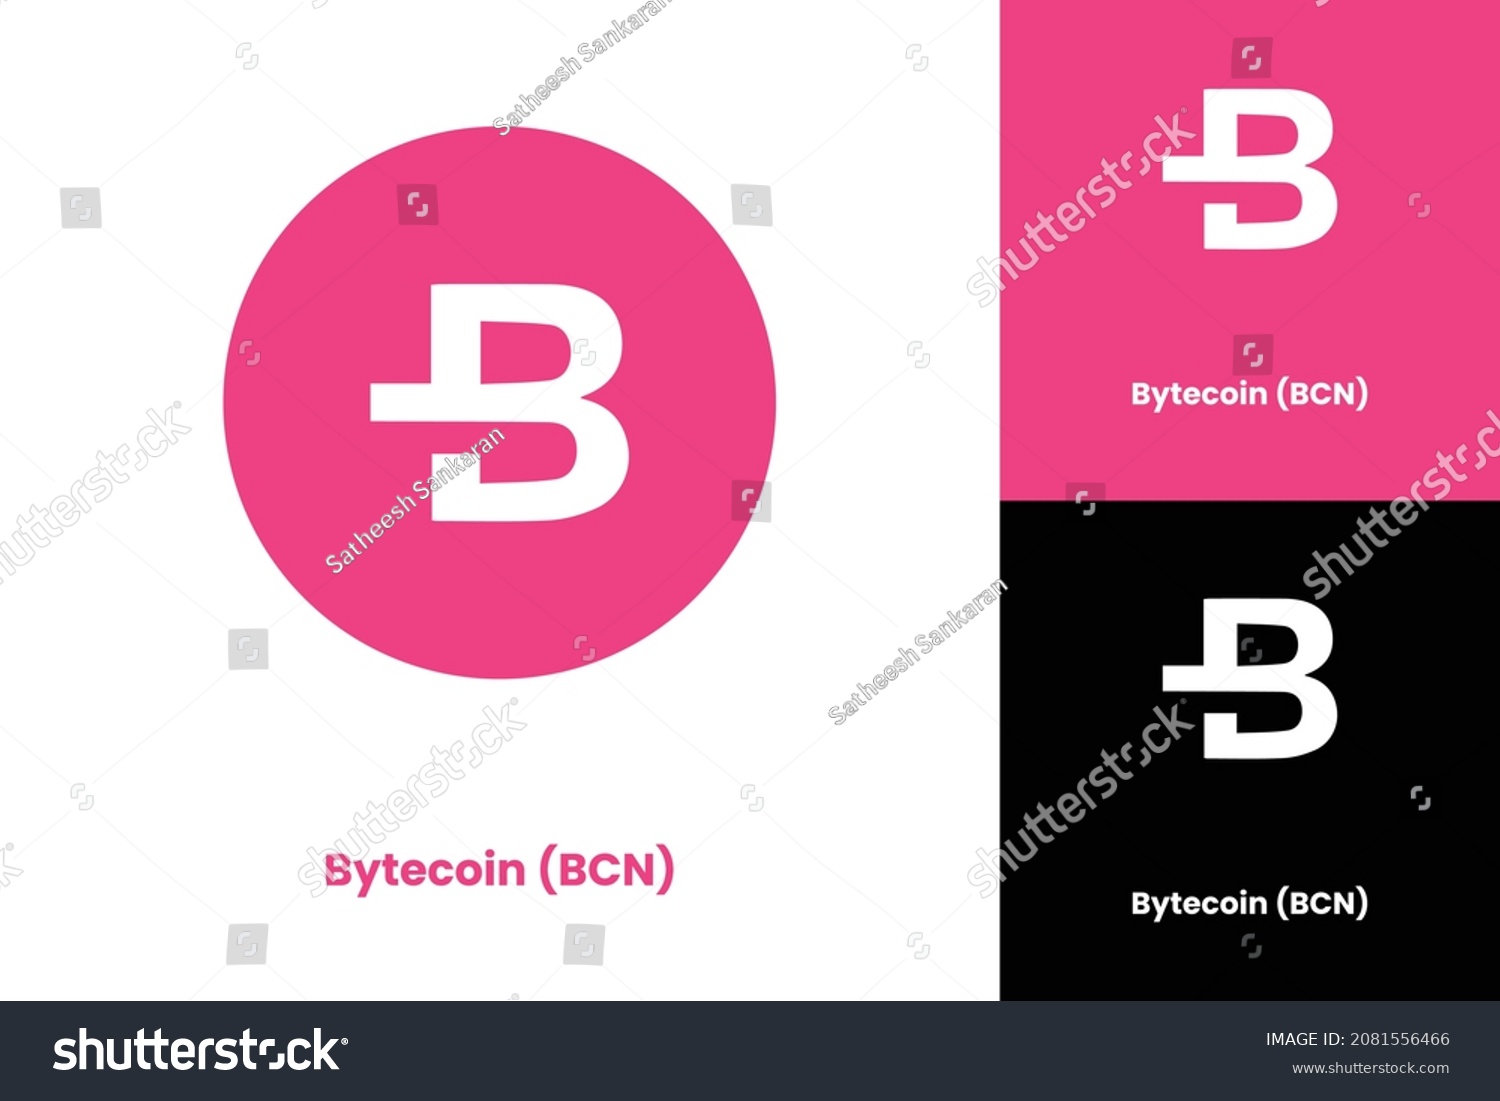 SVG of Bytecoin (BCN) Block chain based crypto currency logo symbol vector illustration template svg